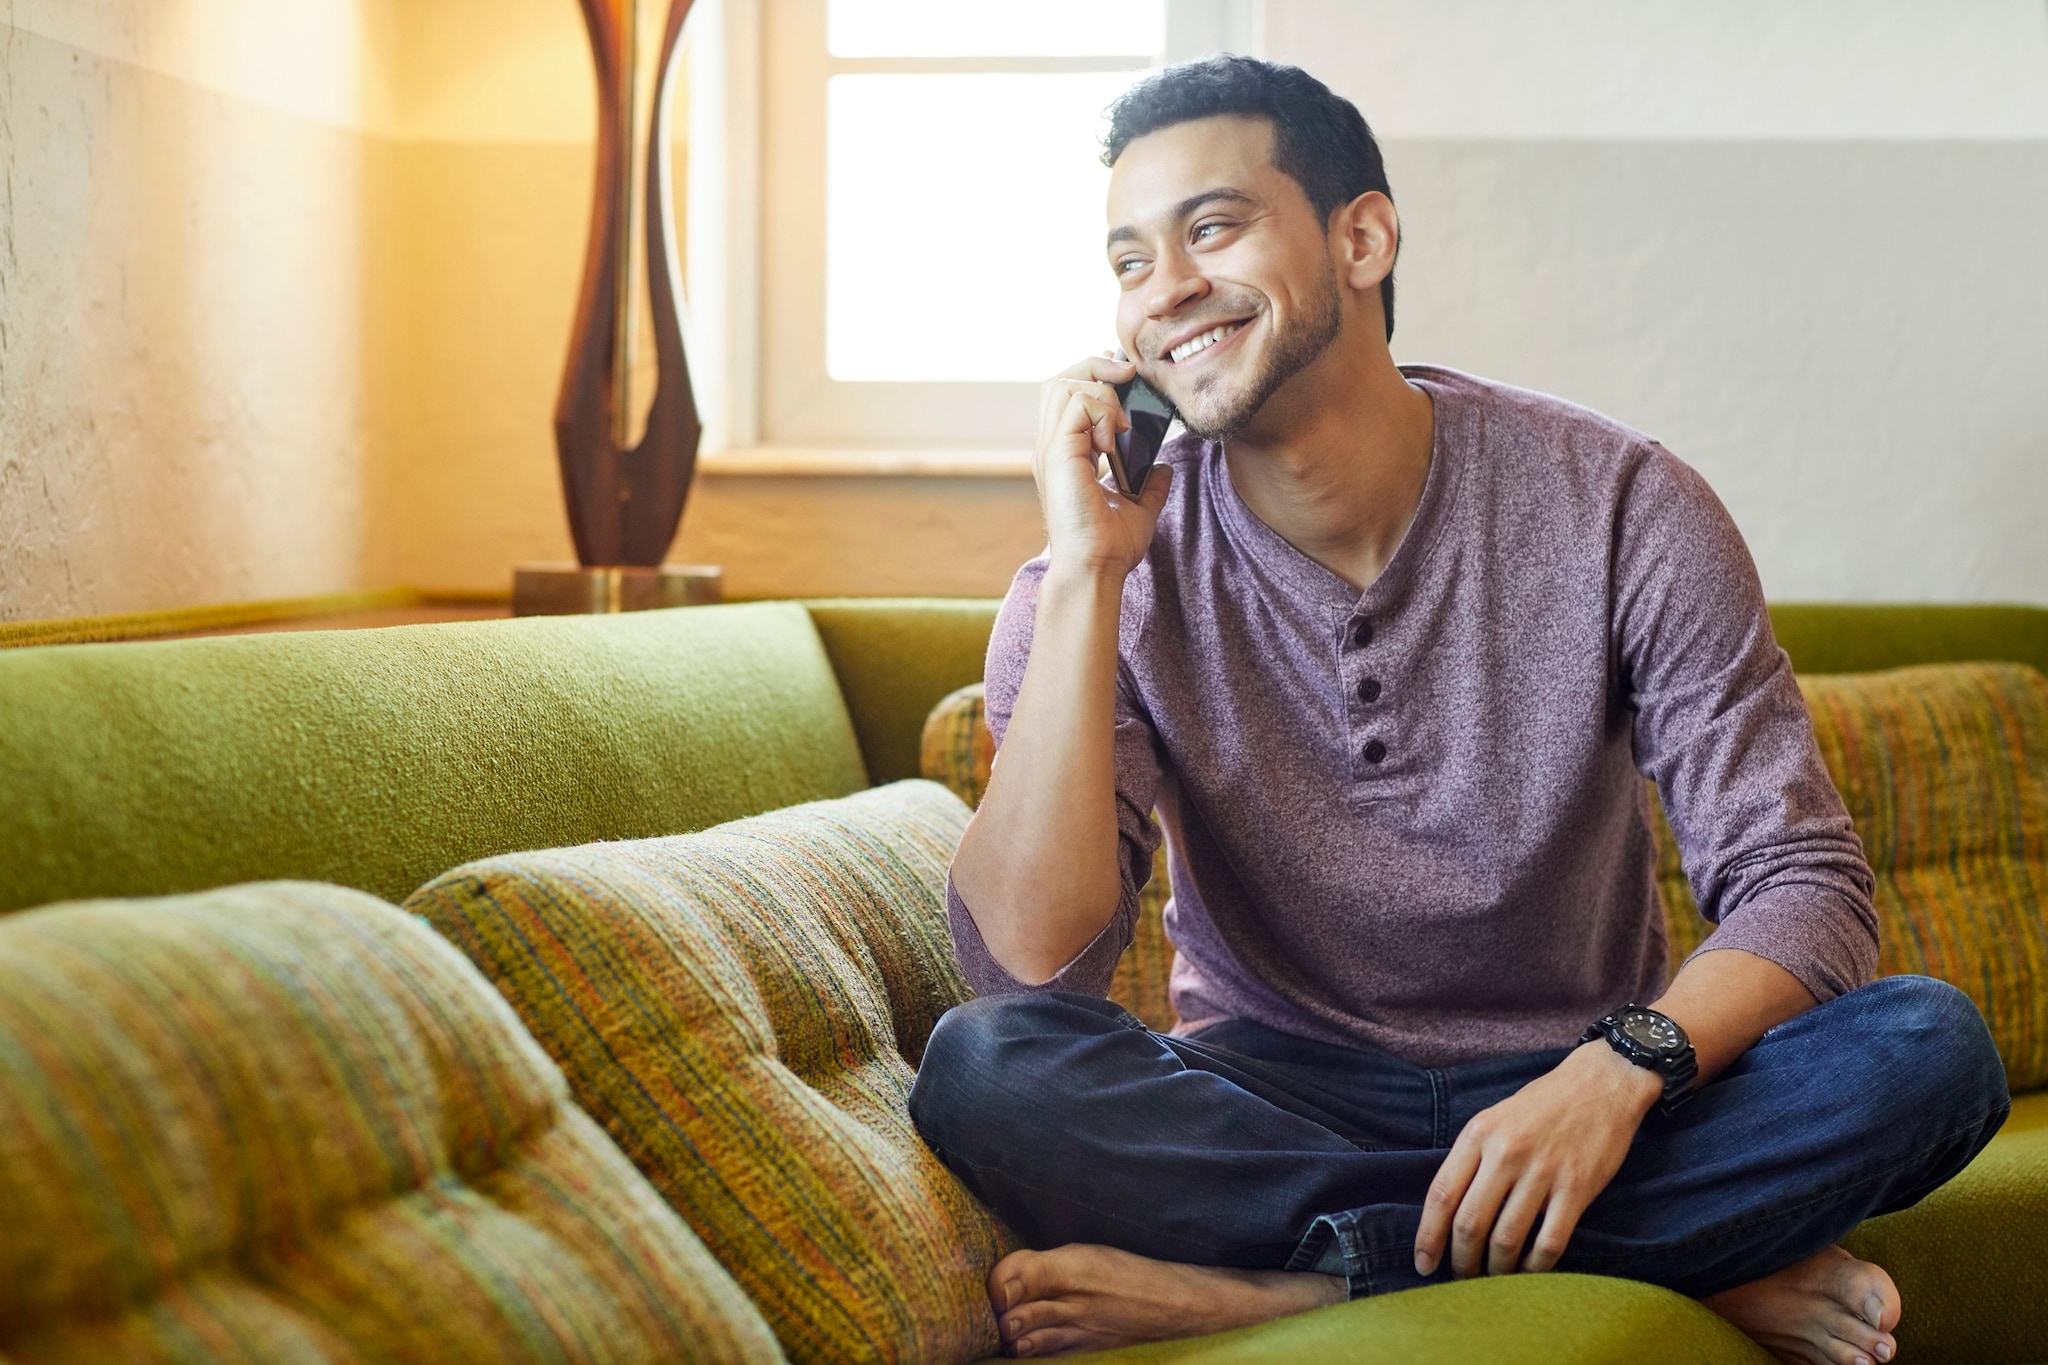 Smiling young man talking on the phone while sitting on the couch.